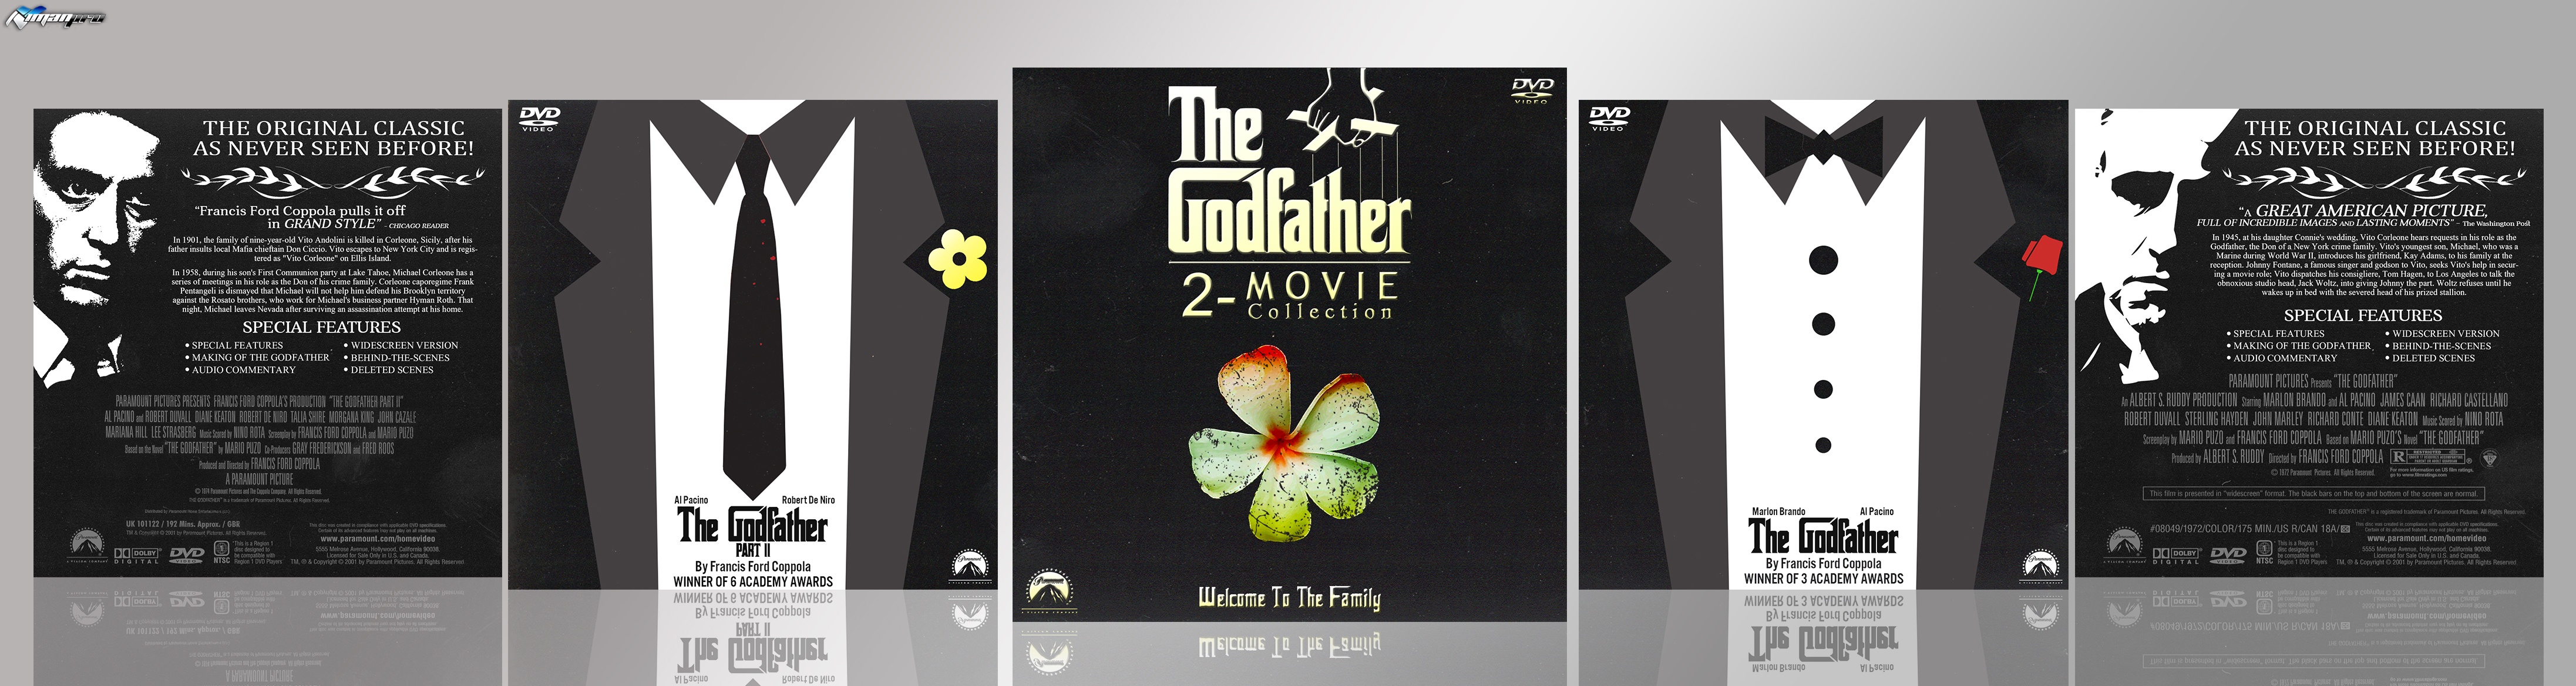 The Godfather Collection box cover